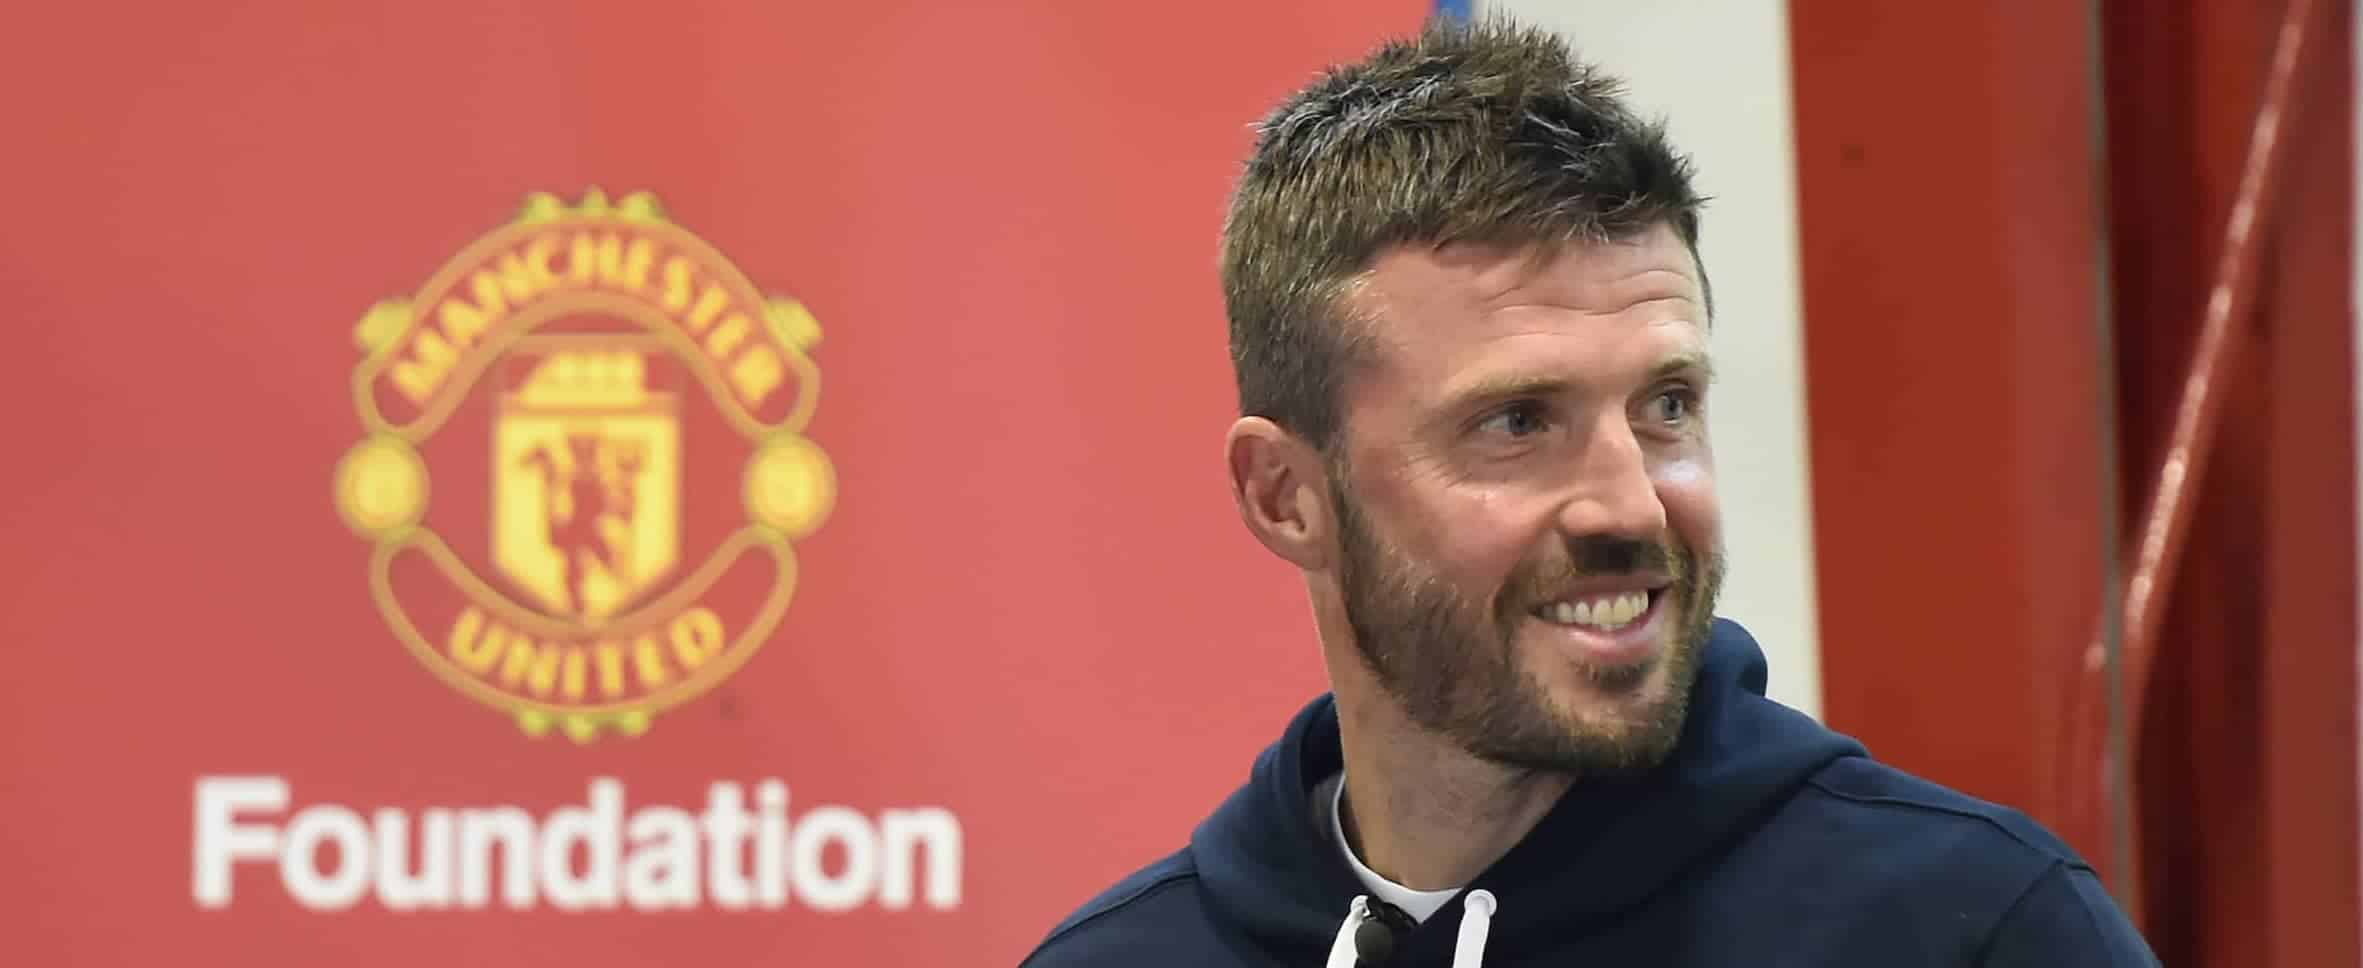 Michael carrick supports manchester united foundation pupils with back-to-school packs